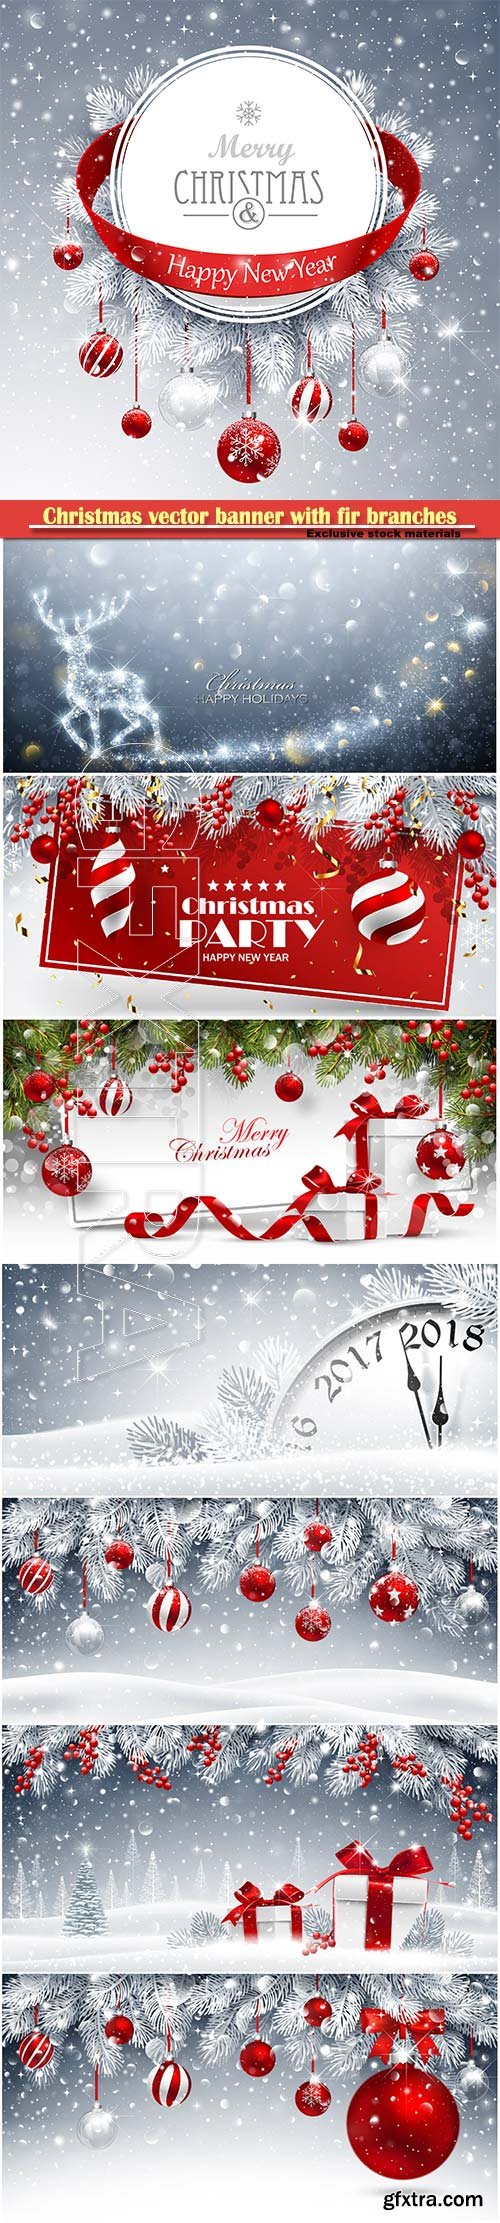 Christmas vector banner with fir branches and red balls on snow sparkling background